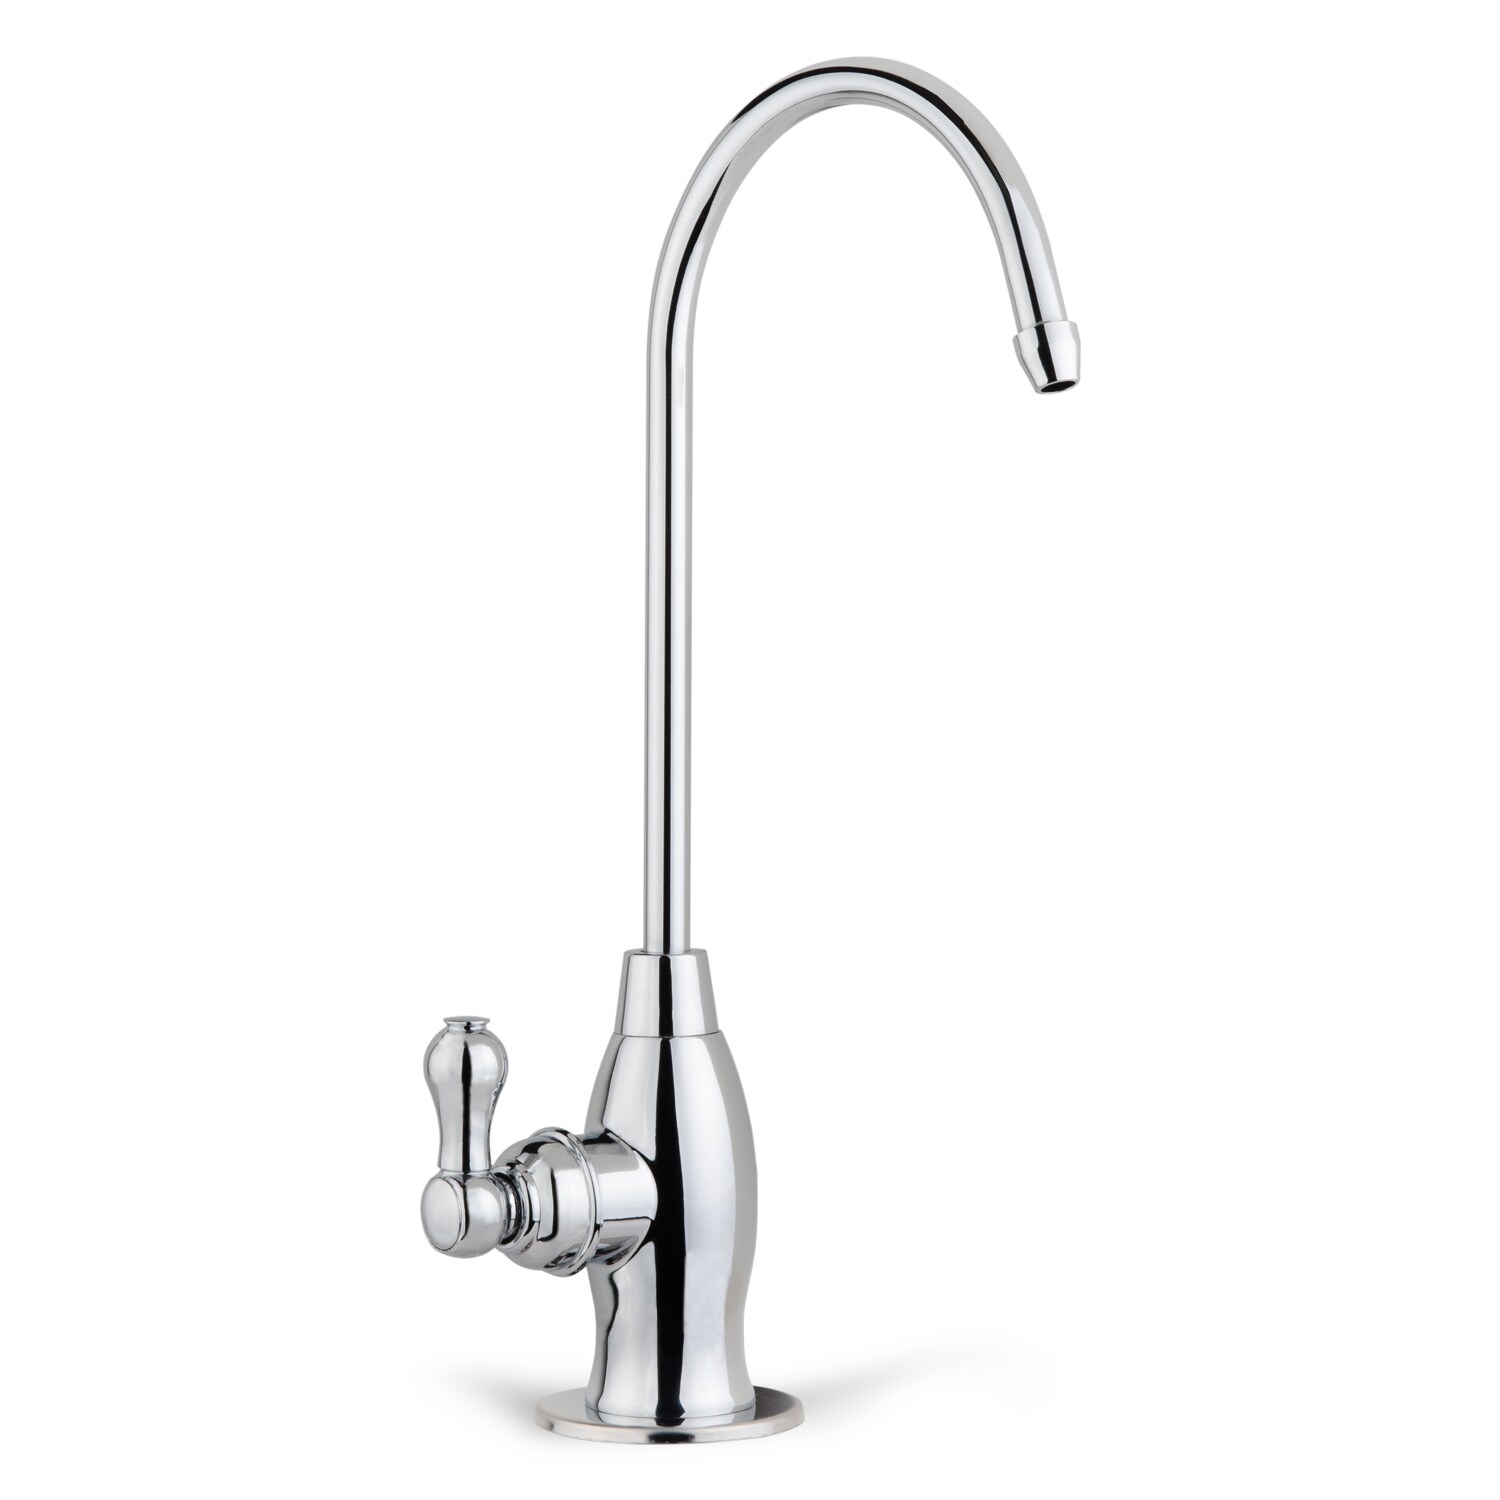 Chrome iSpring Faucet Mount Water Filter 